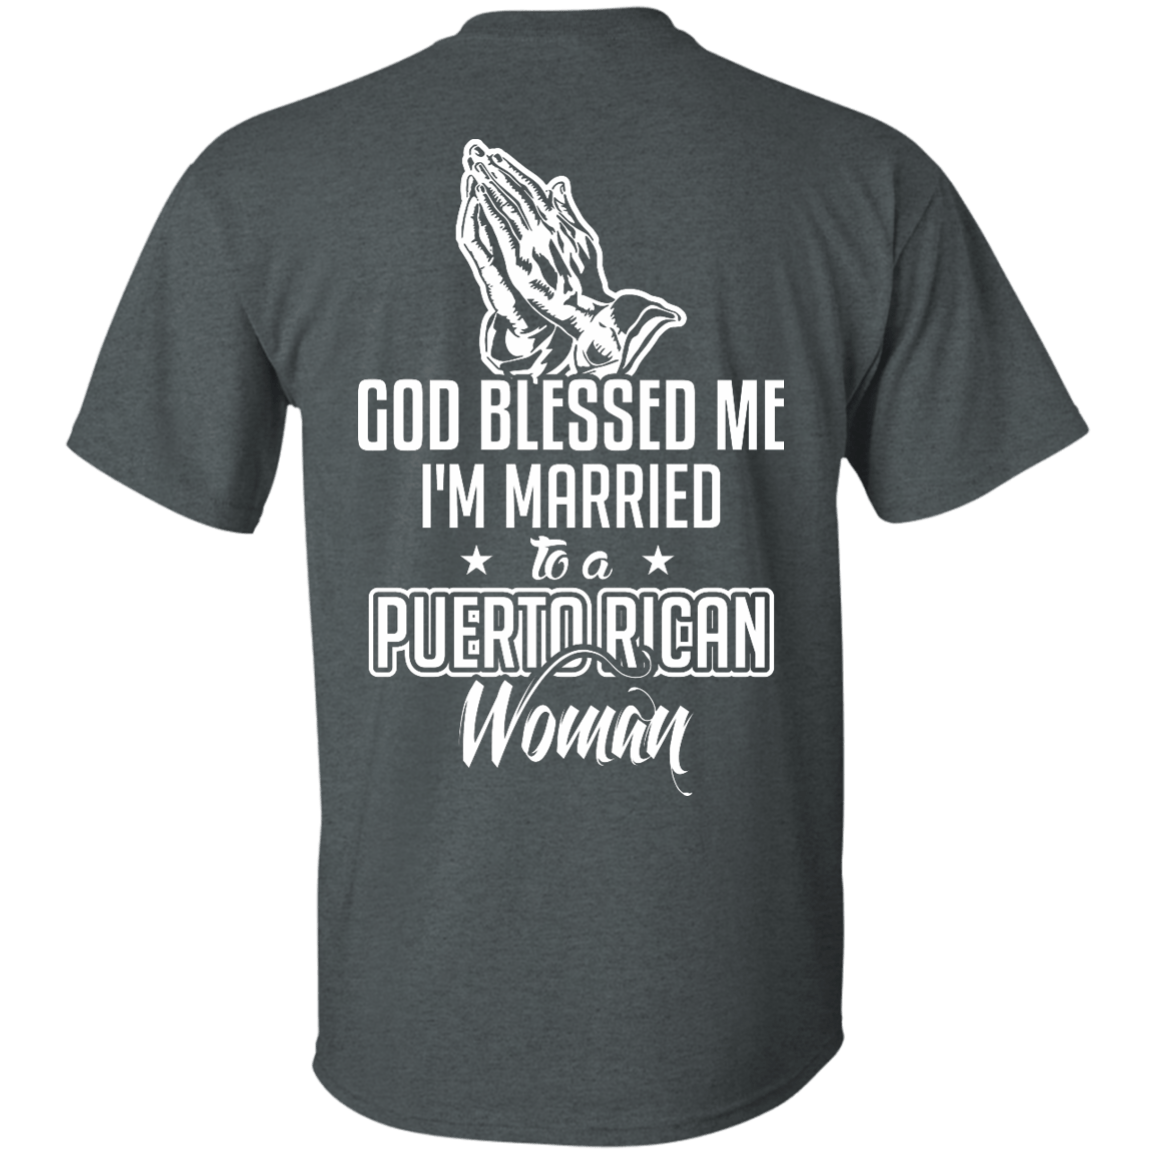 Shirt - Married & Blessed